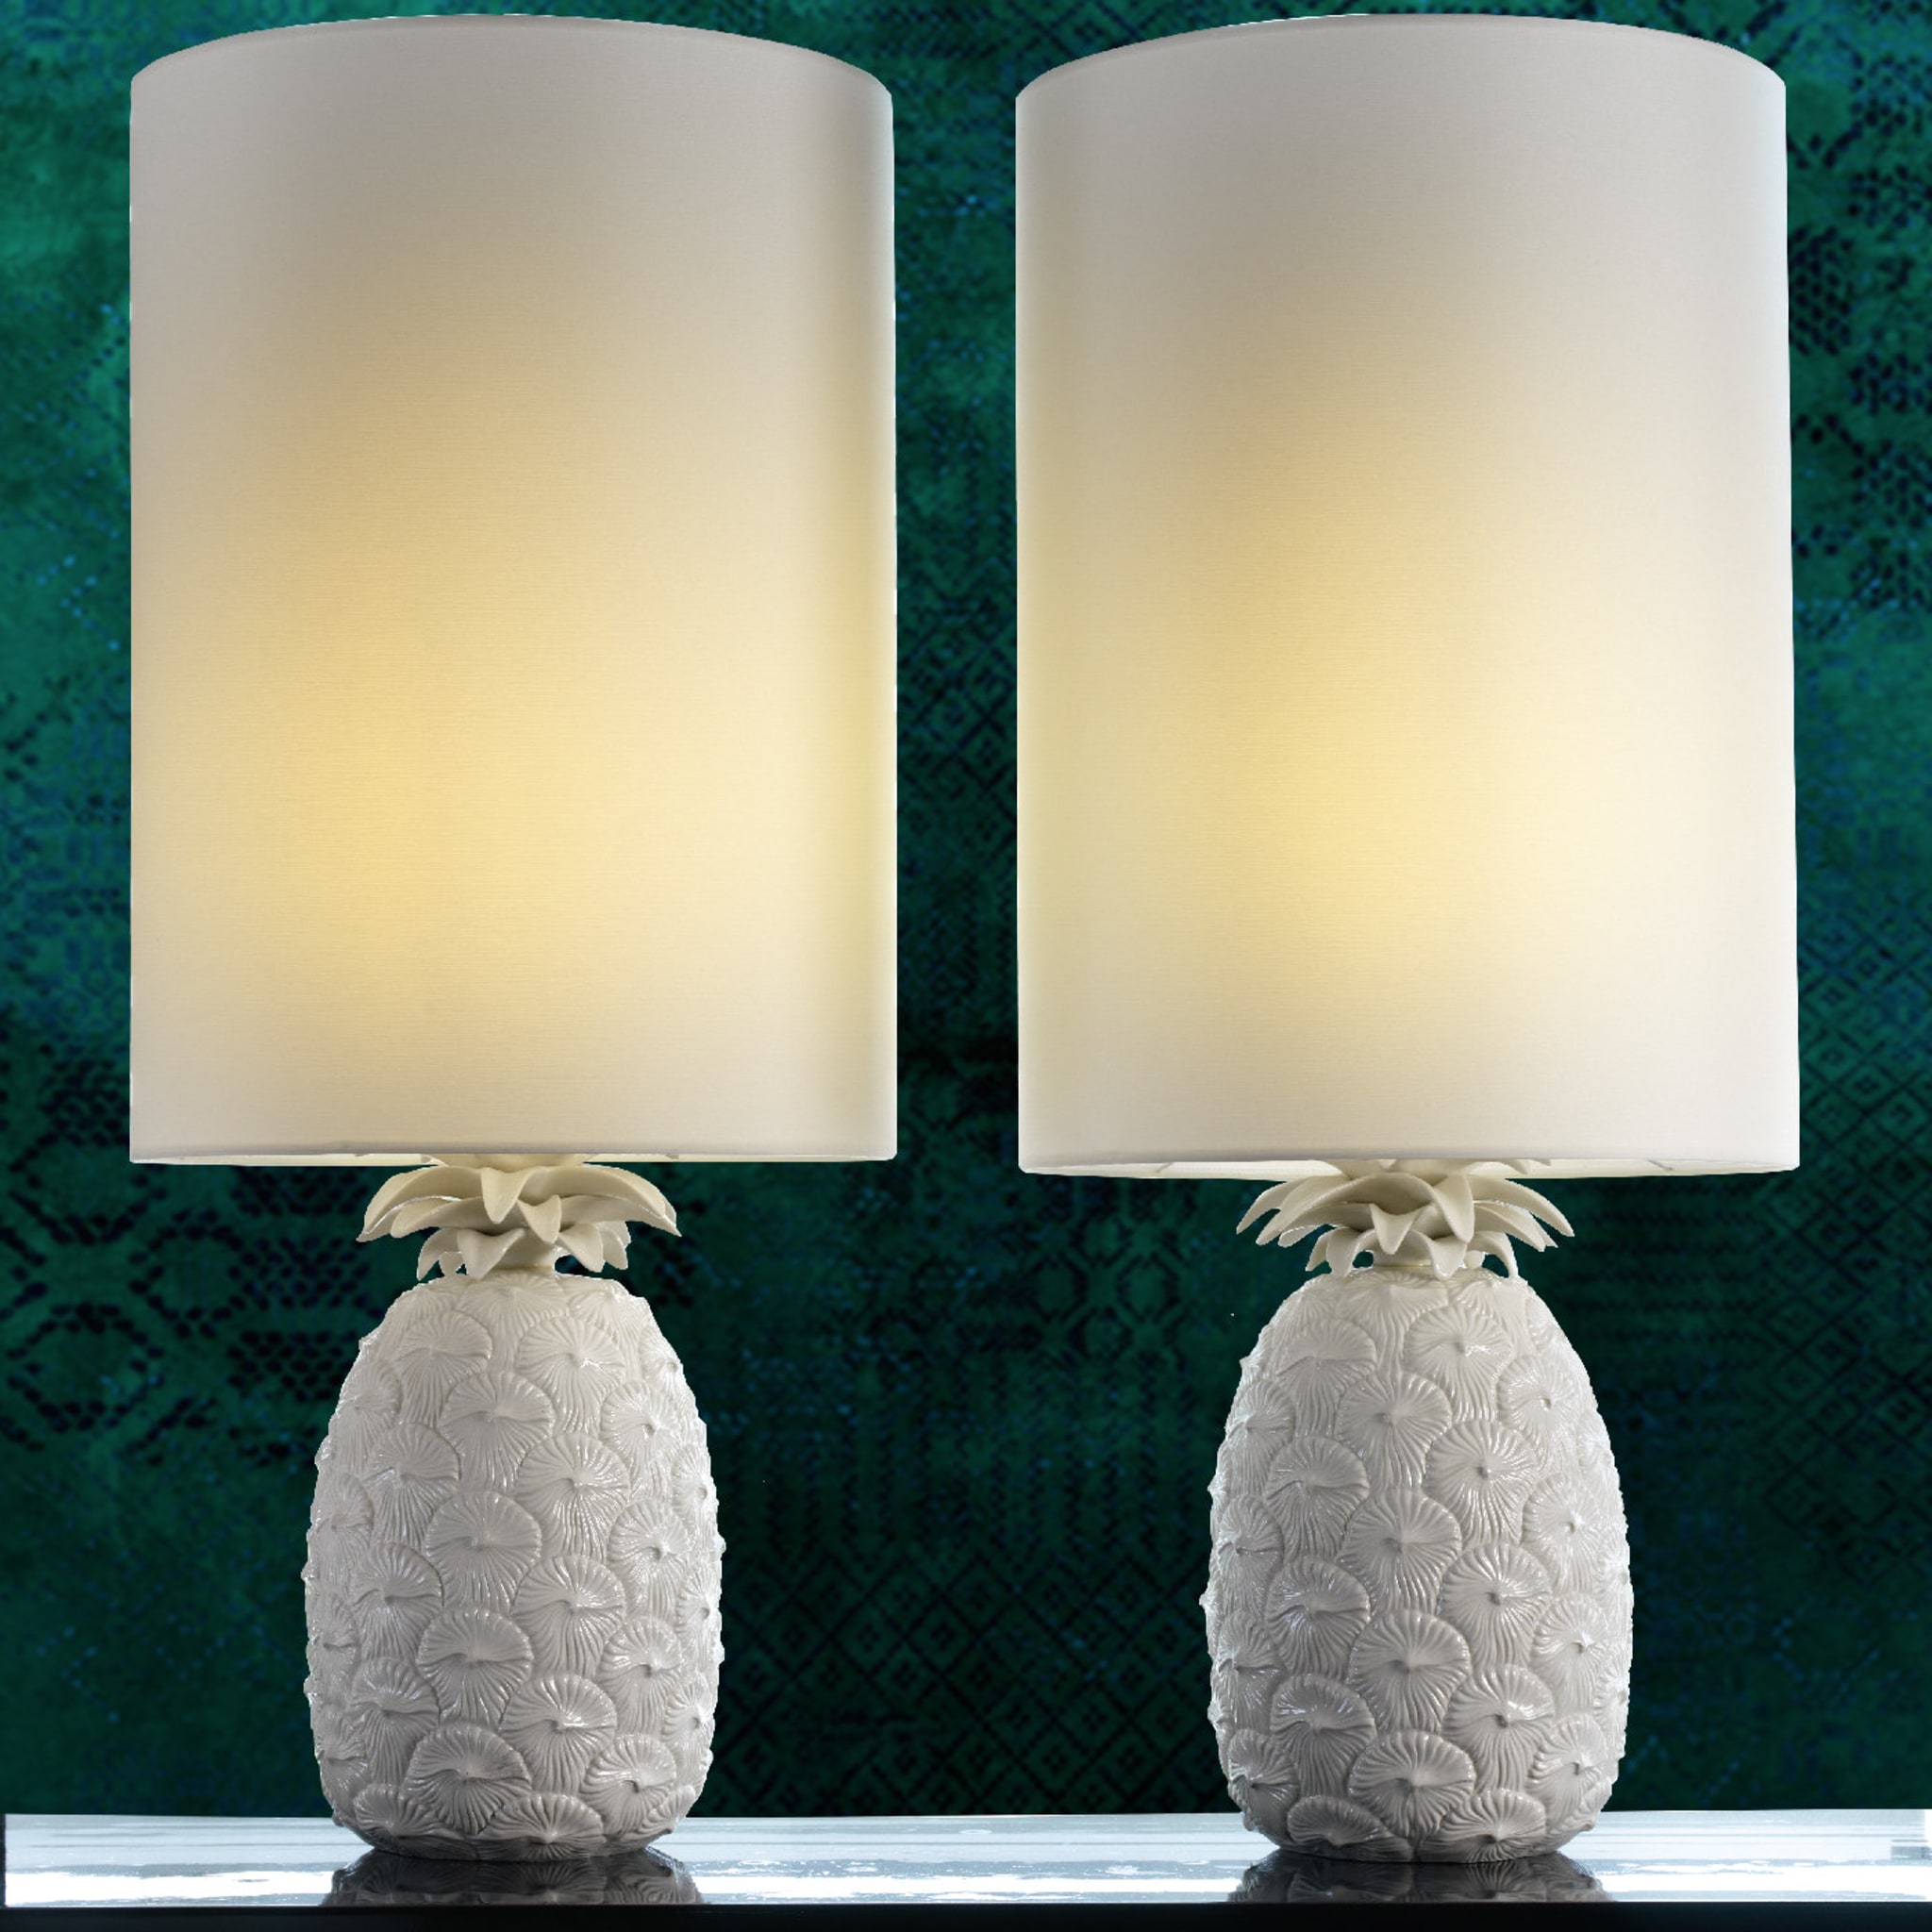 Pineapple Small Table Lamp - Alternative view 1